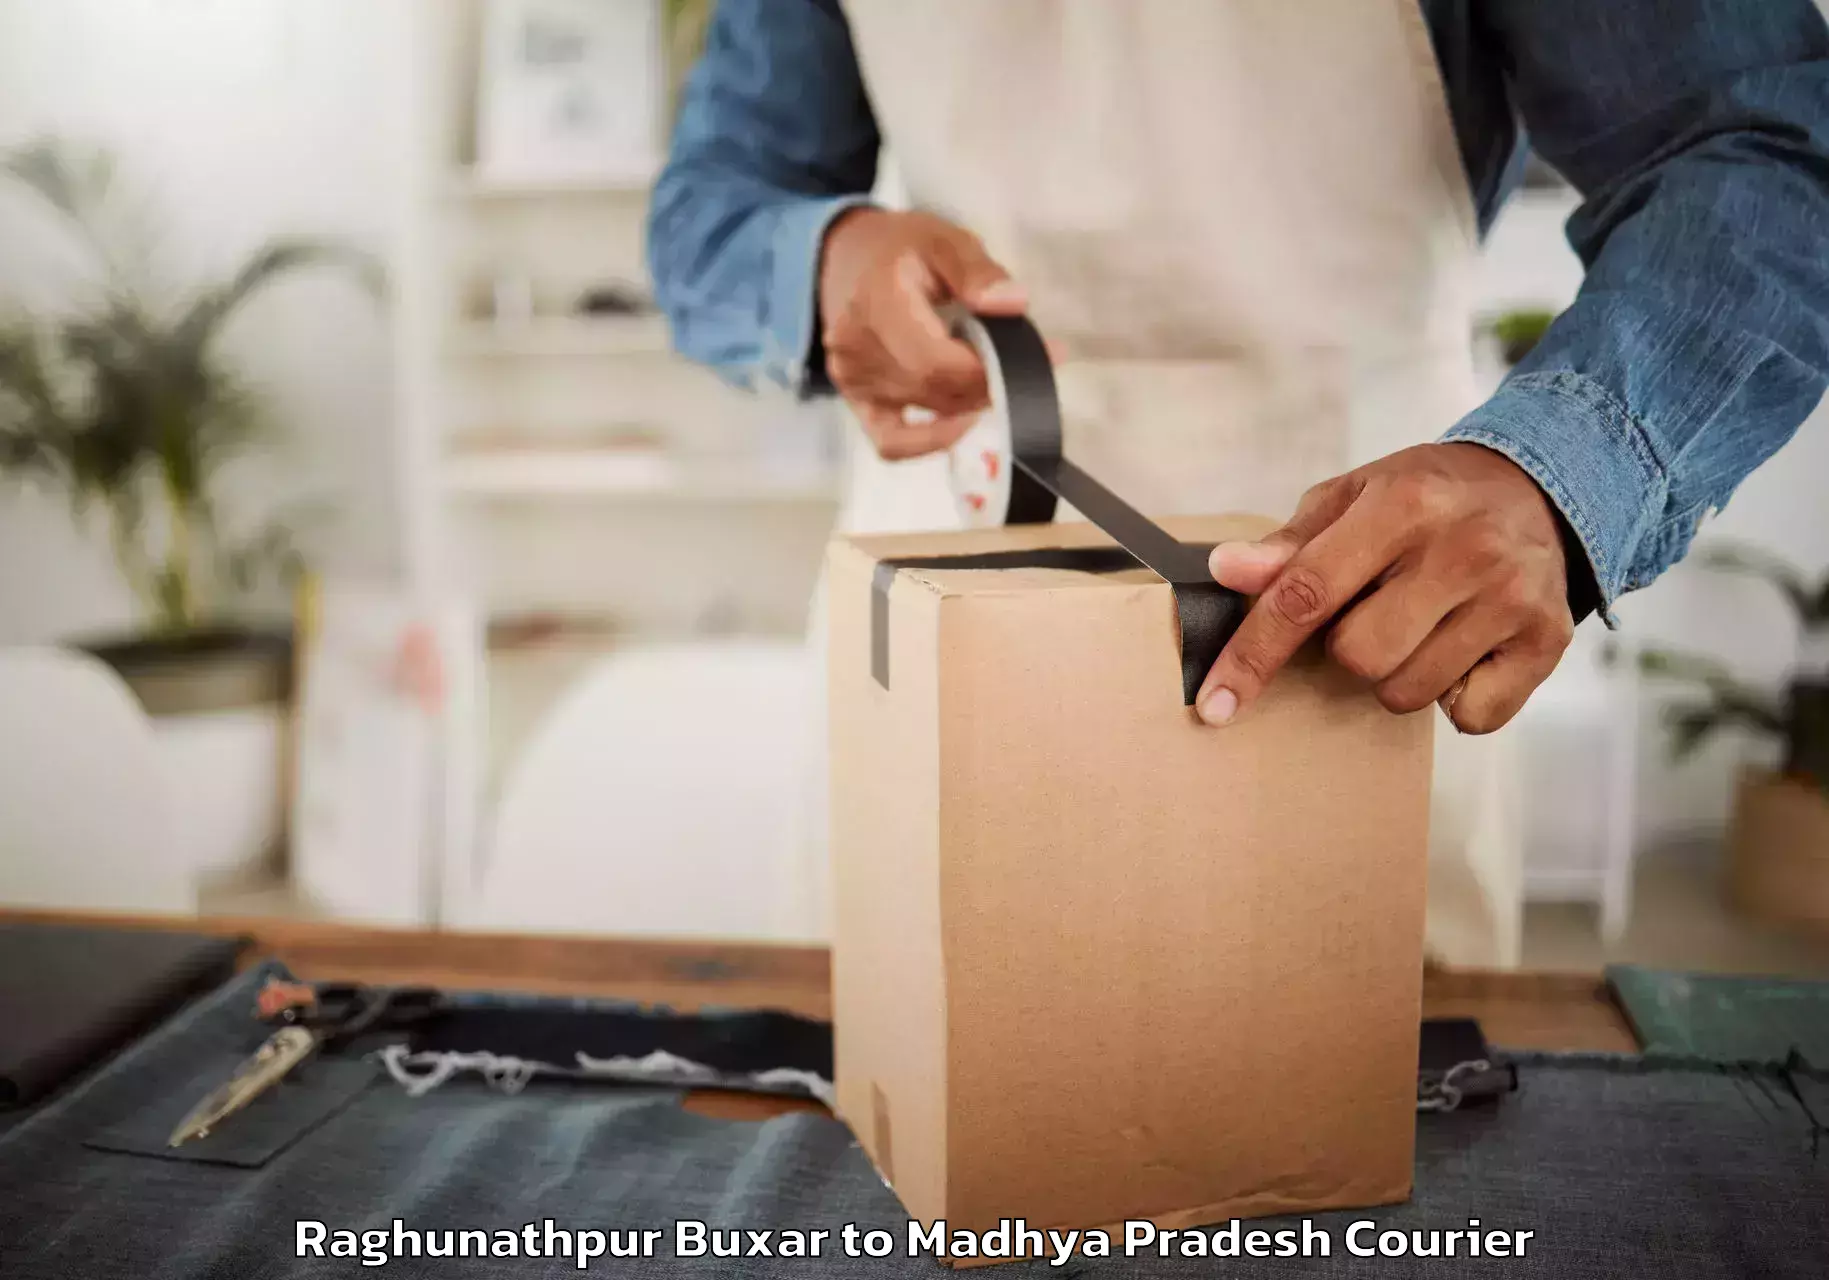 Professional movers and packers Raghunathpur Buxar to Hatta